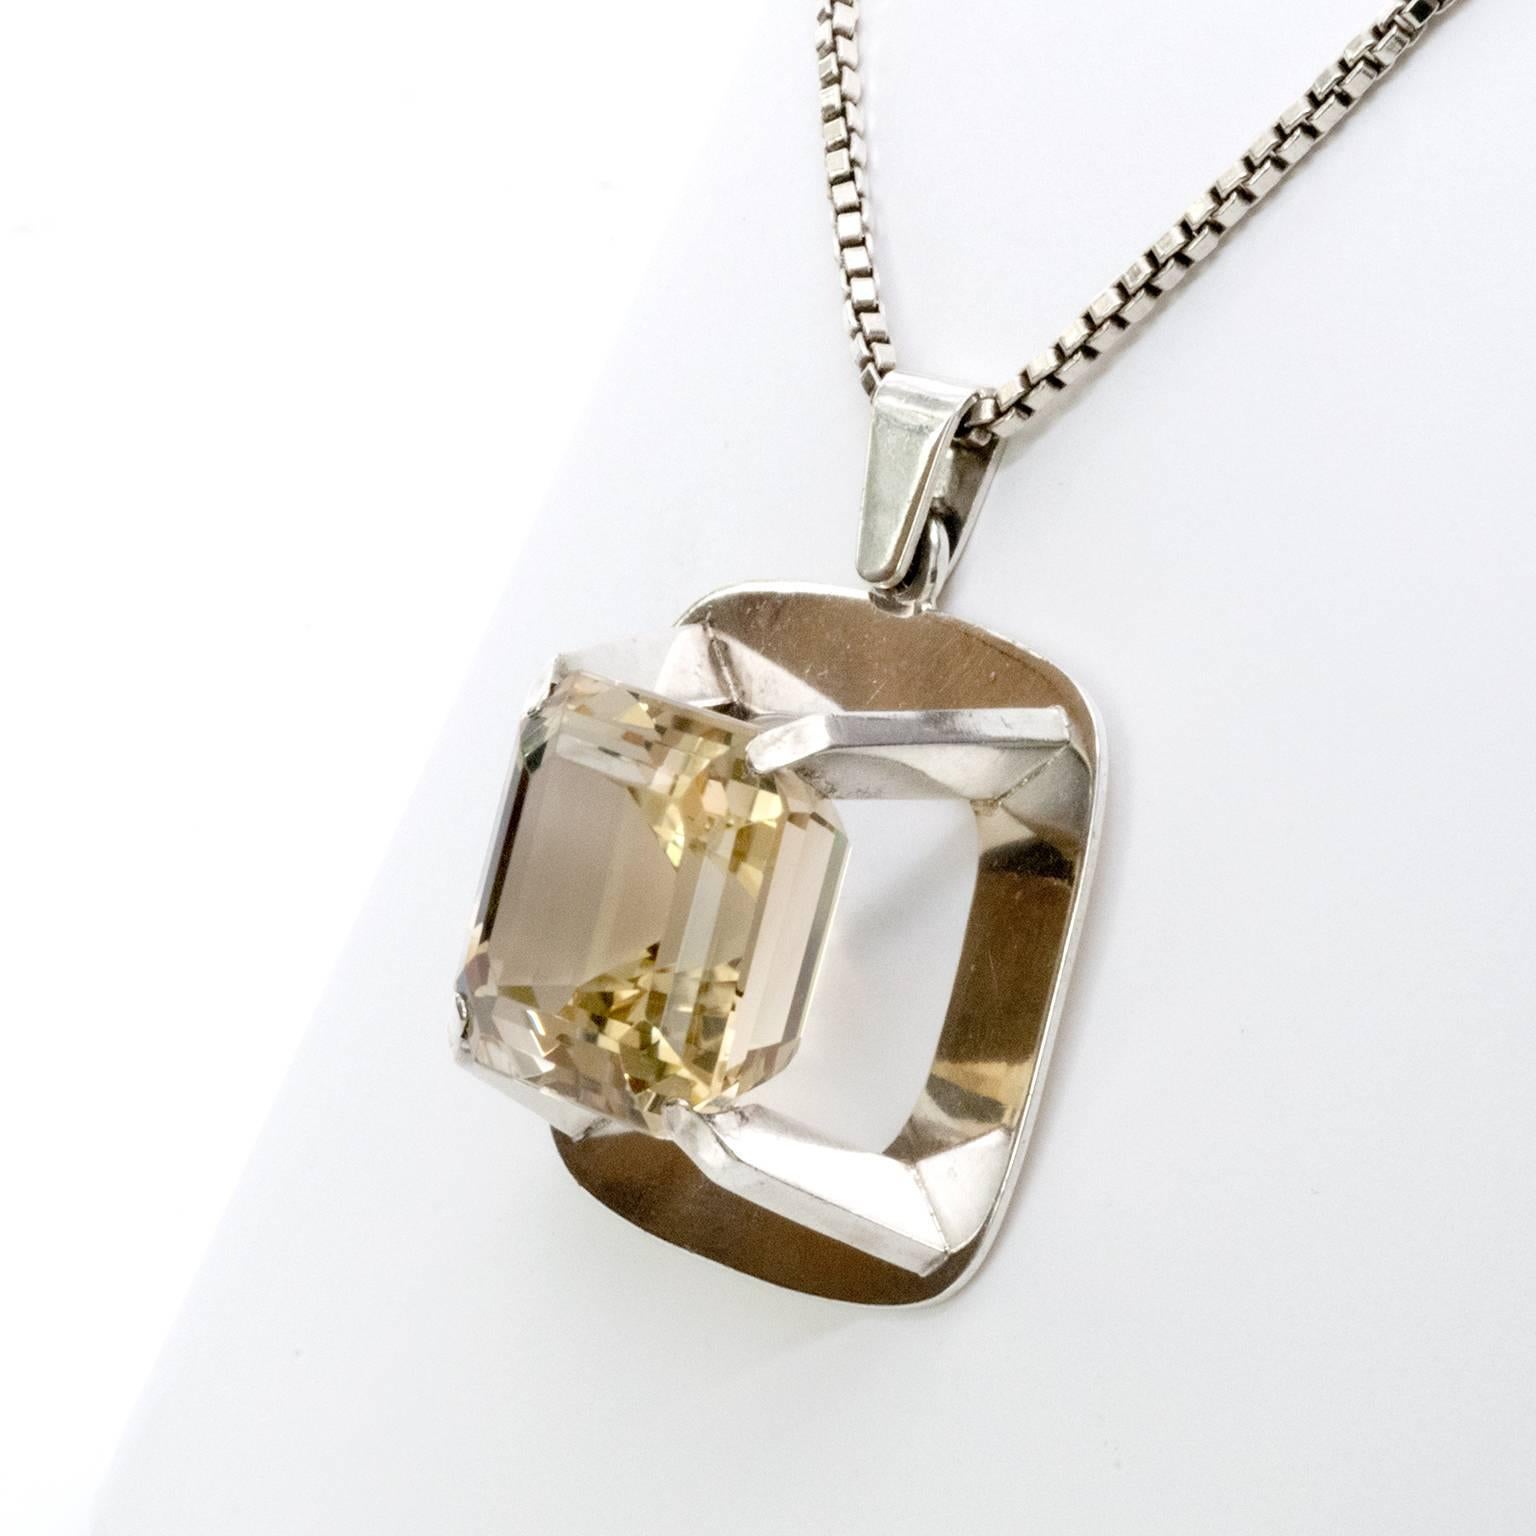 A silver necklace with a rounded rectangular  pendant with a mounted citron rock crystal. Designed by Birger Lindgren, 1967, Stockholm Sweden.
Width: 2